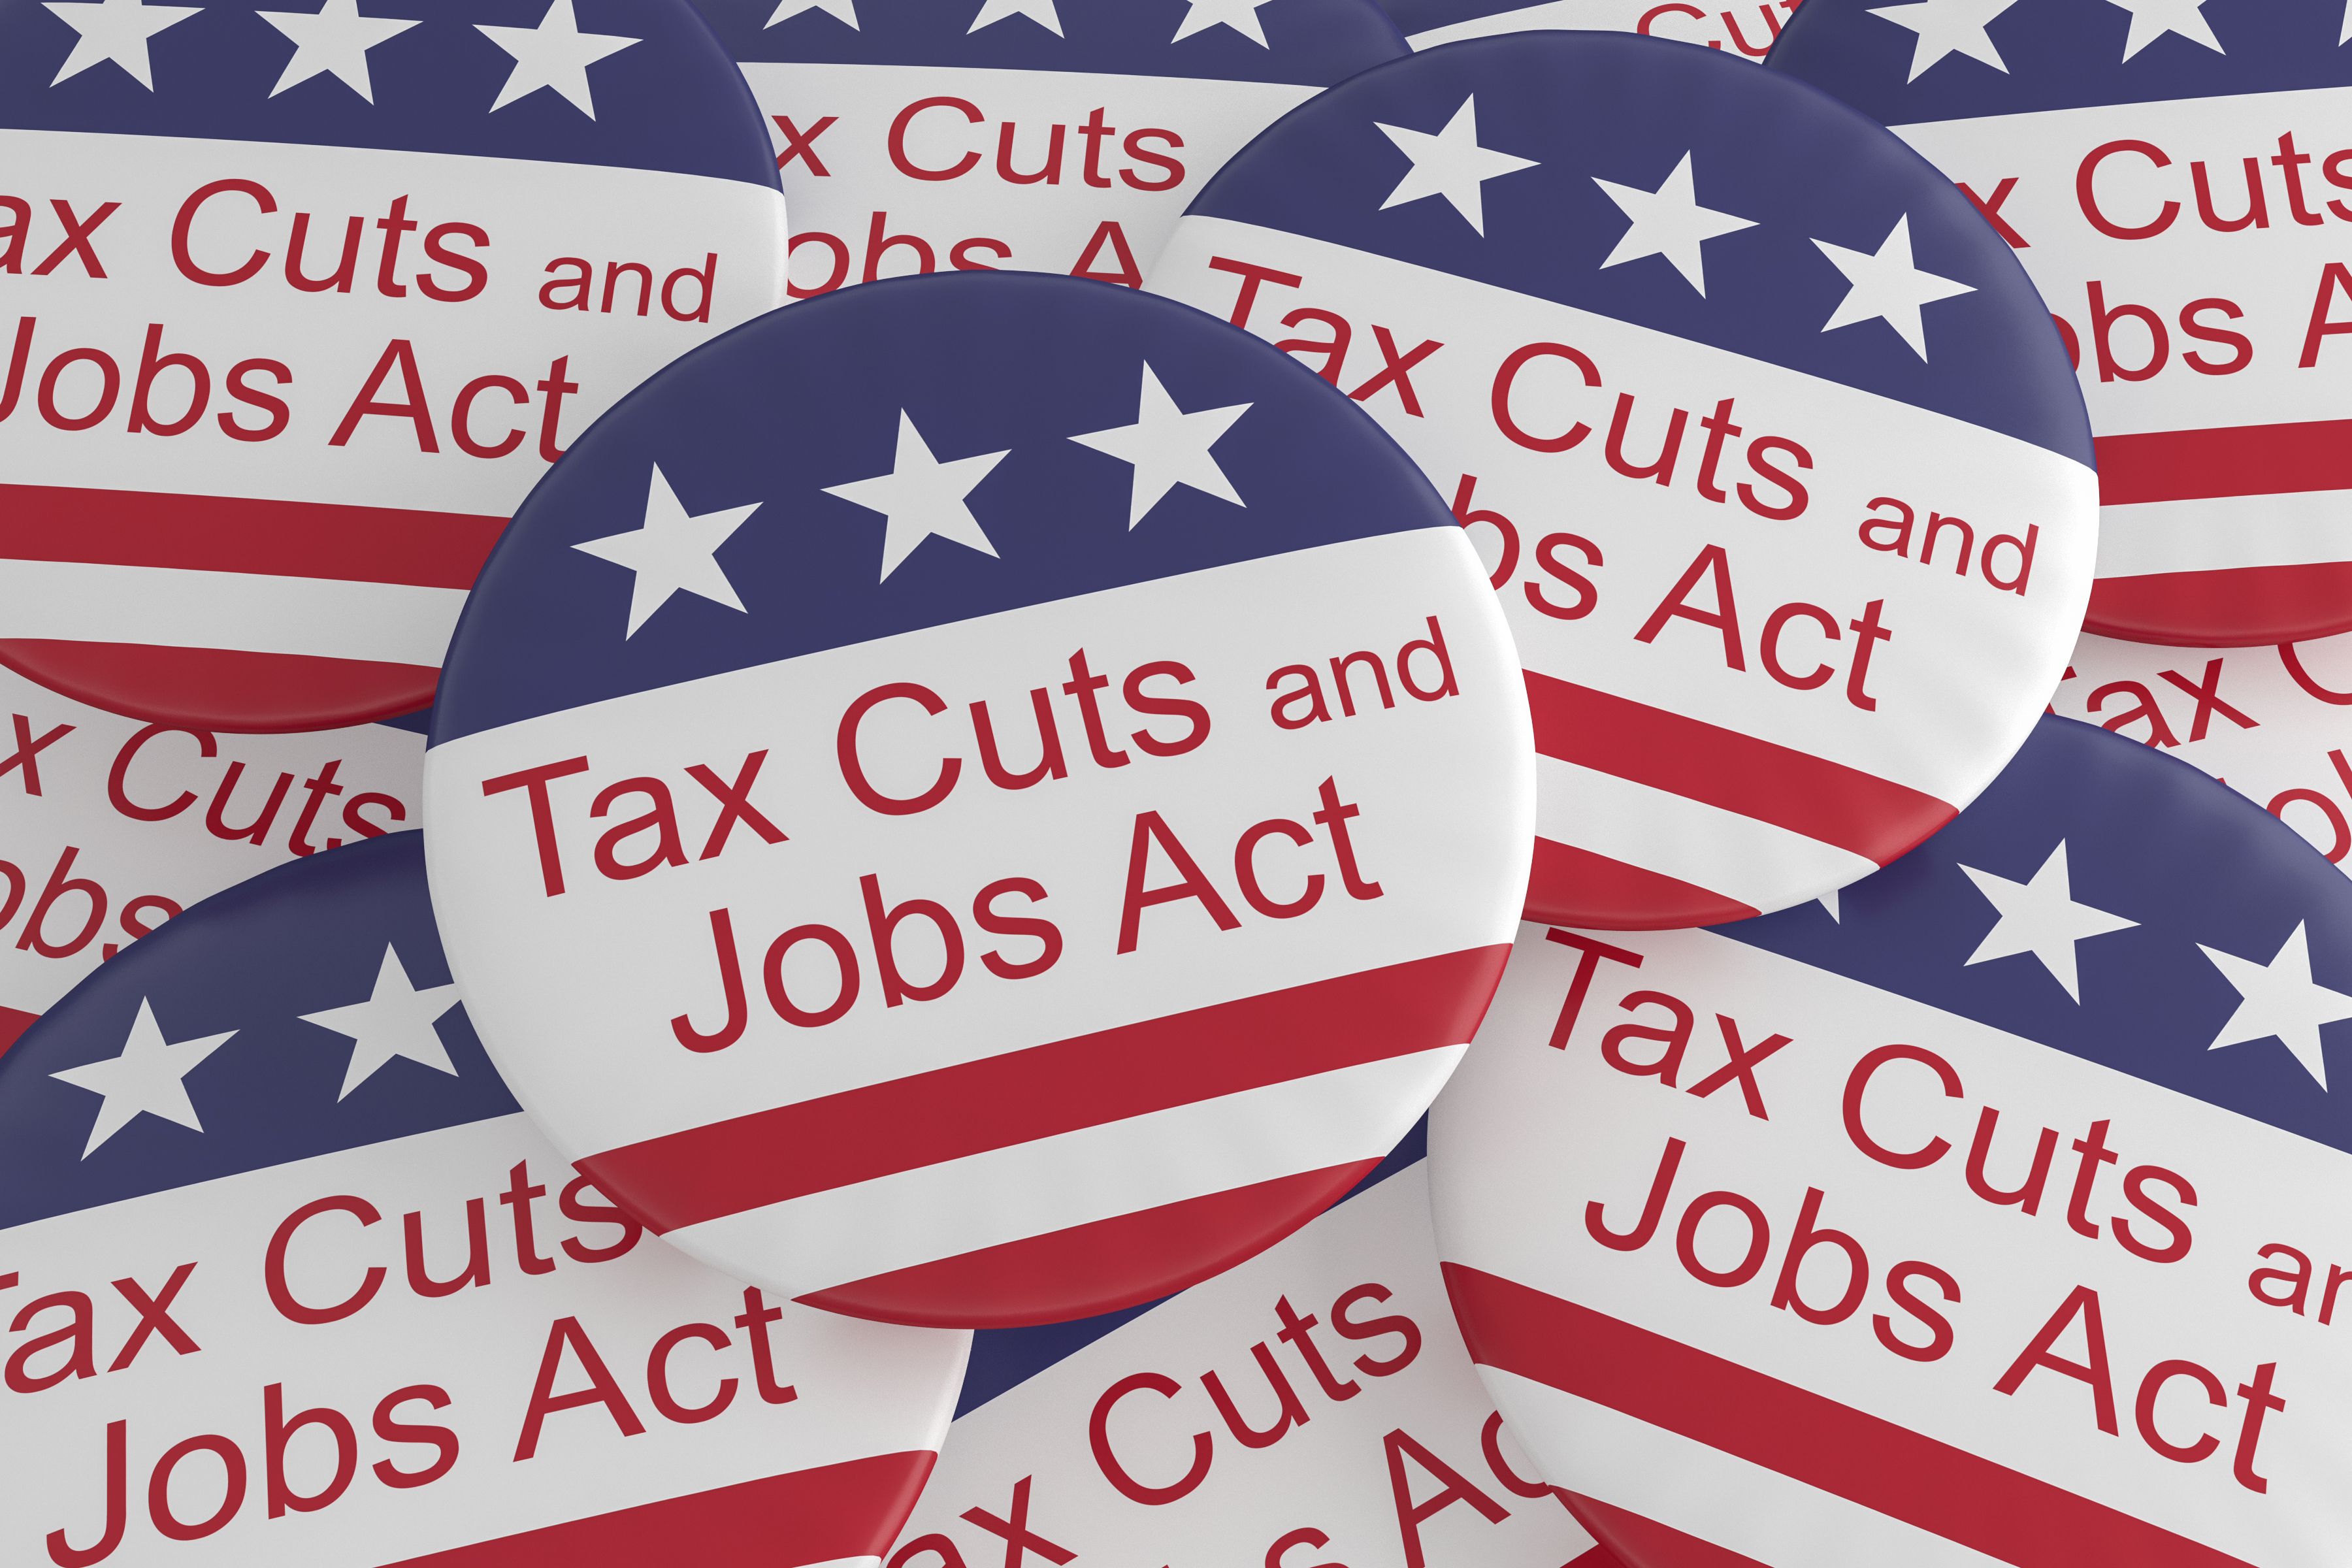 Nonprofits and the Tax Cuts and Jobs Act (TCJA)